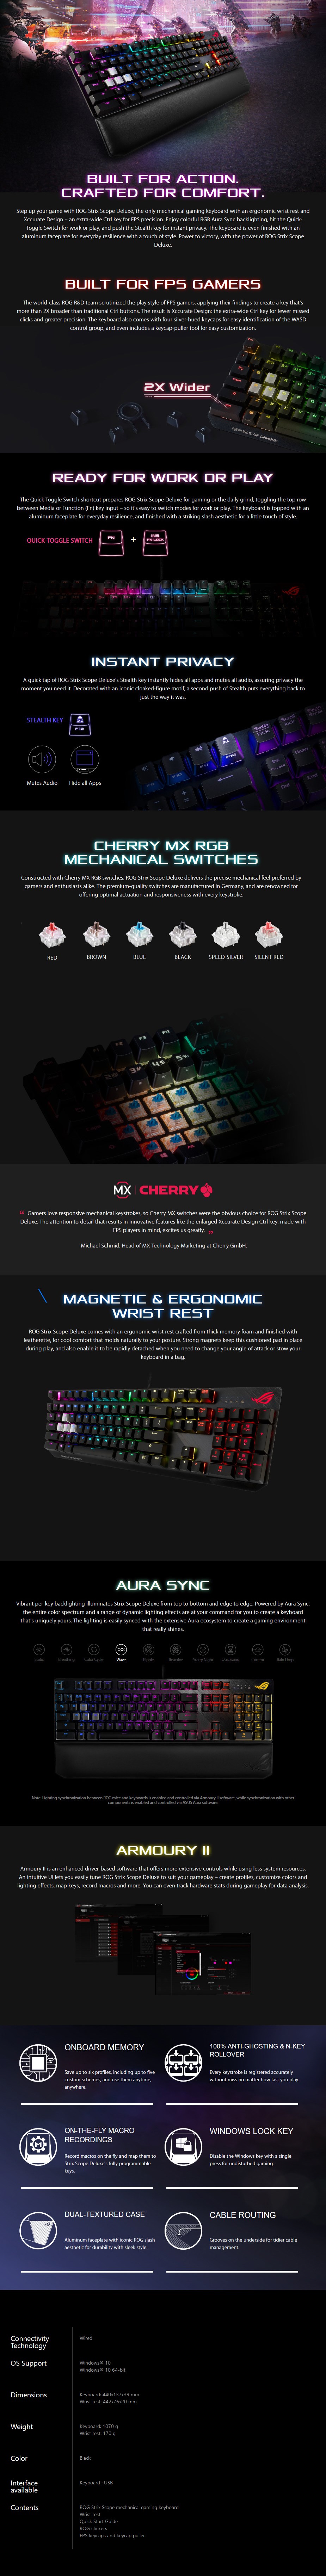 ASUS ROG Strix Scope RGB Mechanical Gaming Keyboard - Cherry MX Blue Switches - Overview 1